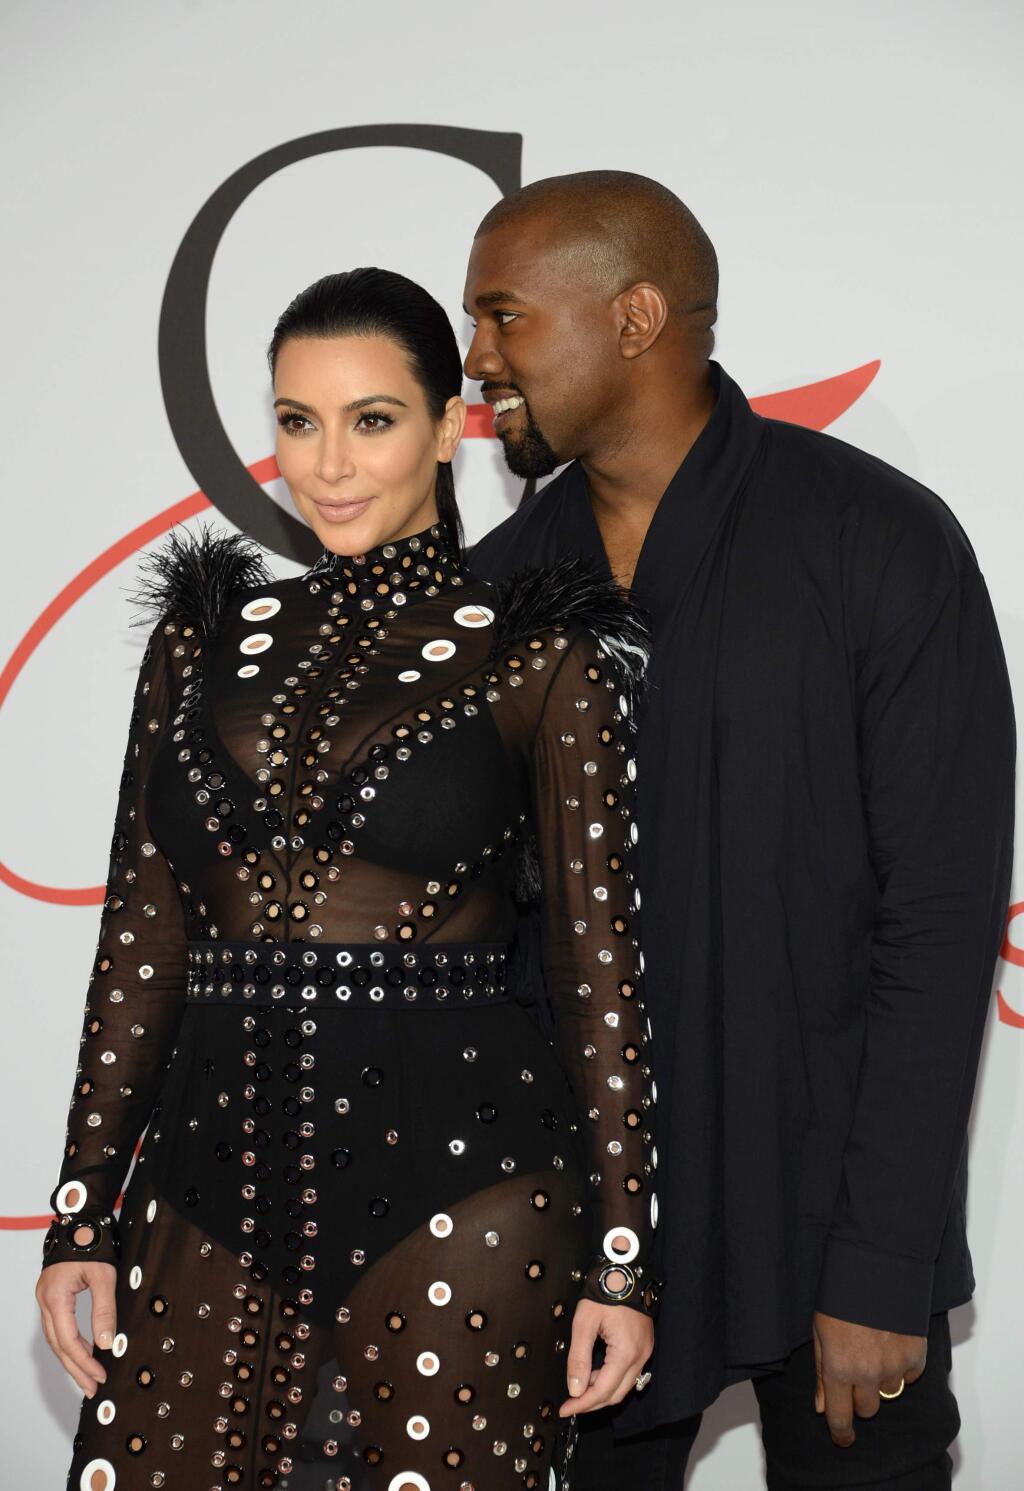 Kim Kardashian, left, and Kanye West arrive at the 2015 CFDA Fashion Awards at Alice Tully Hall, Lincoln Center, on Monday, June 1, 2015, in New York. (Photo by Evan Agostini/Invision/AP)